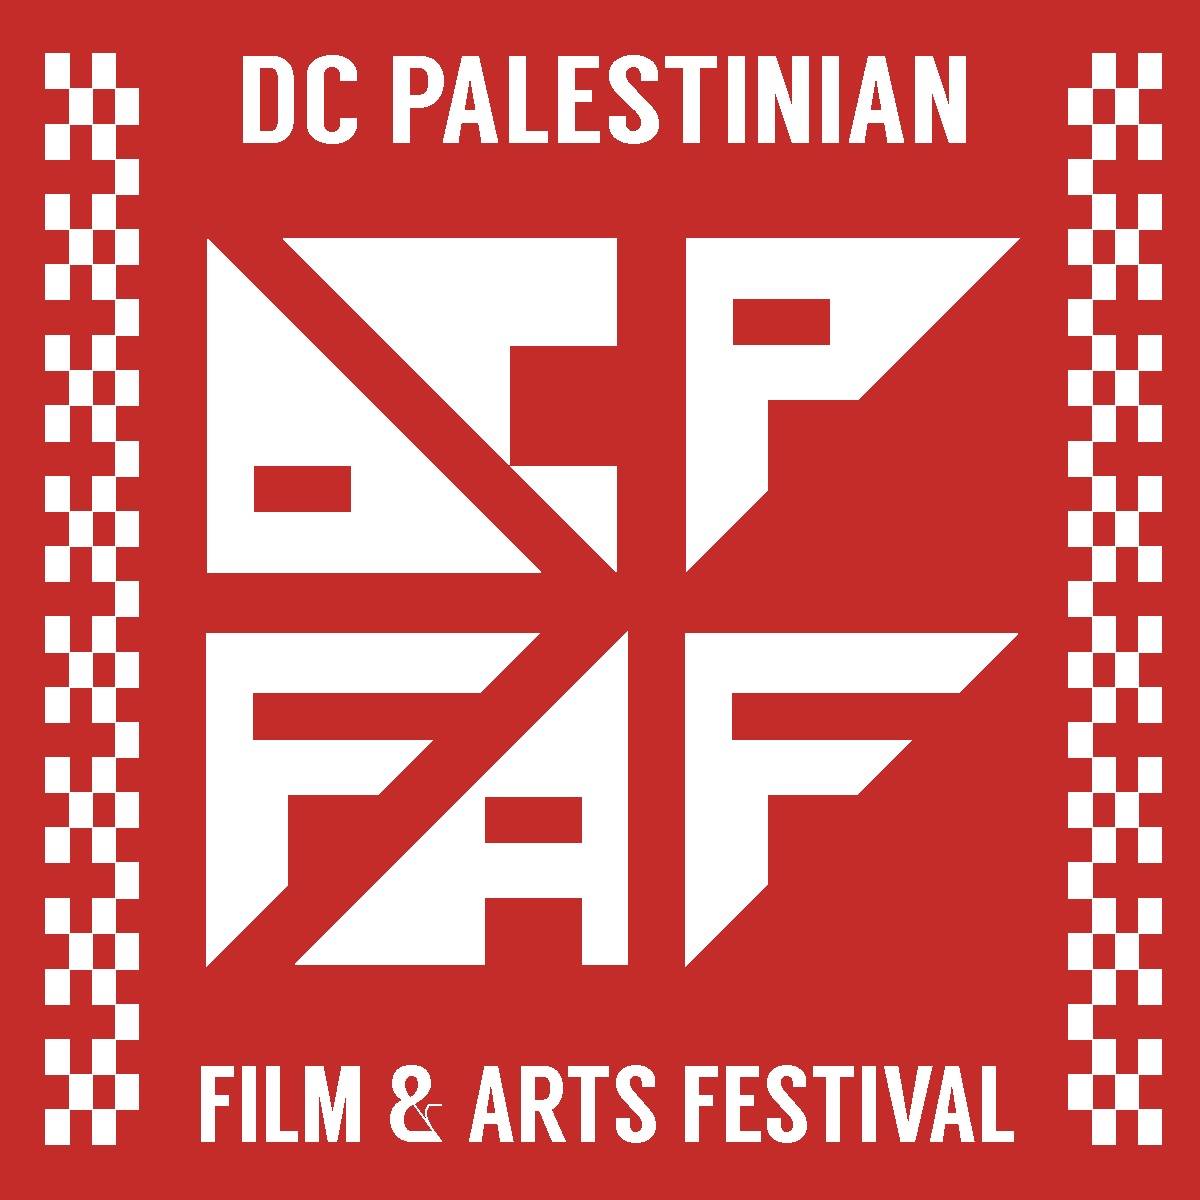 The 4th Annual DC Palestinian Film and Arts Festival